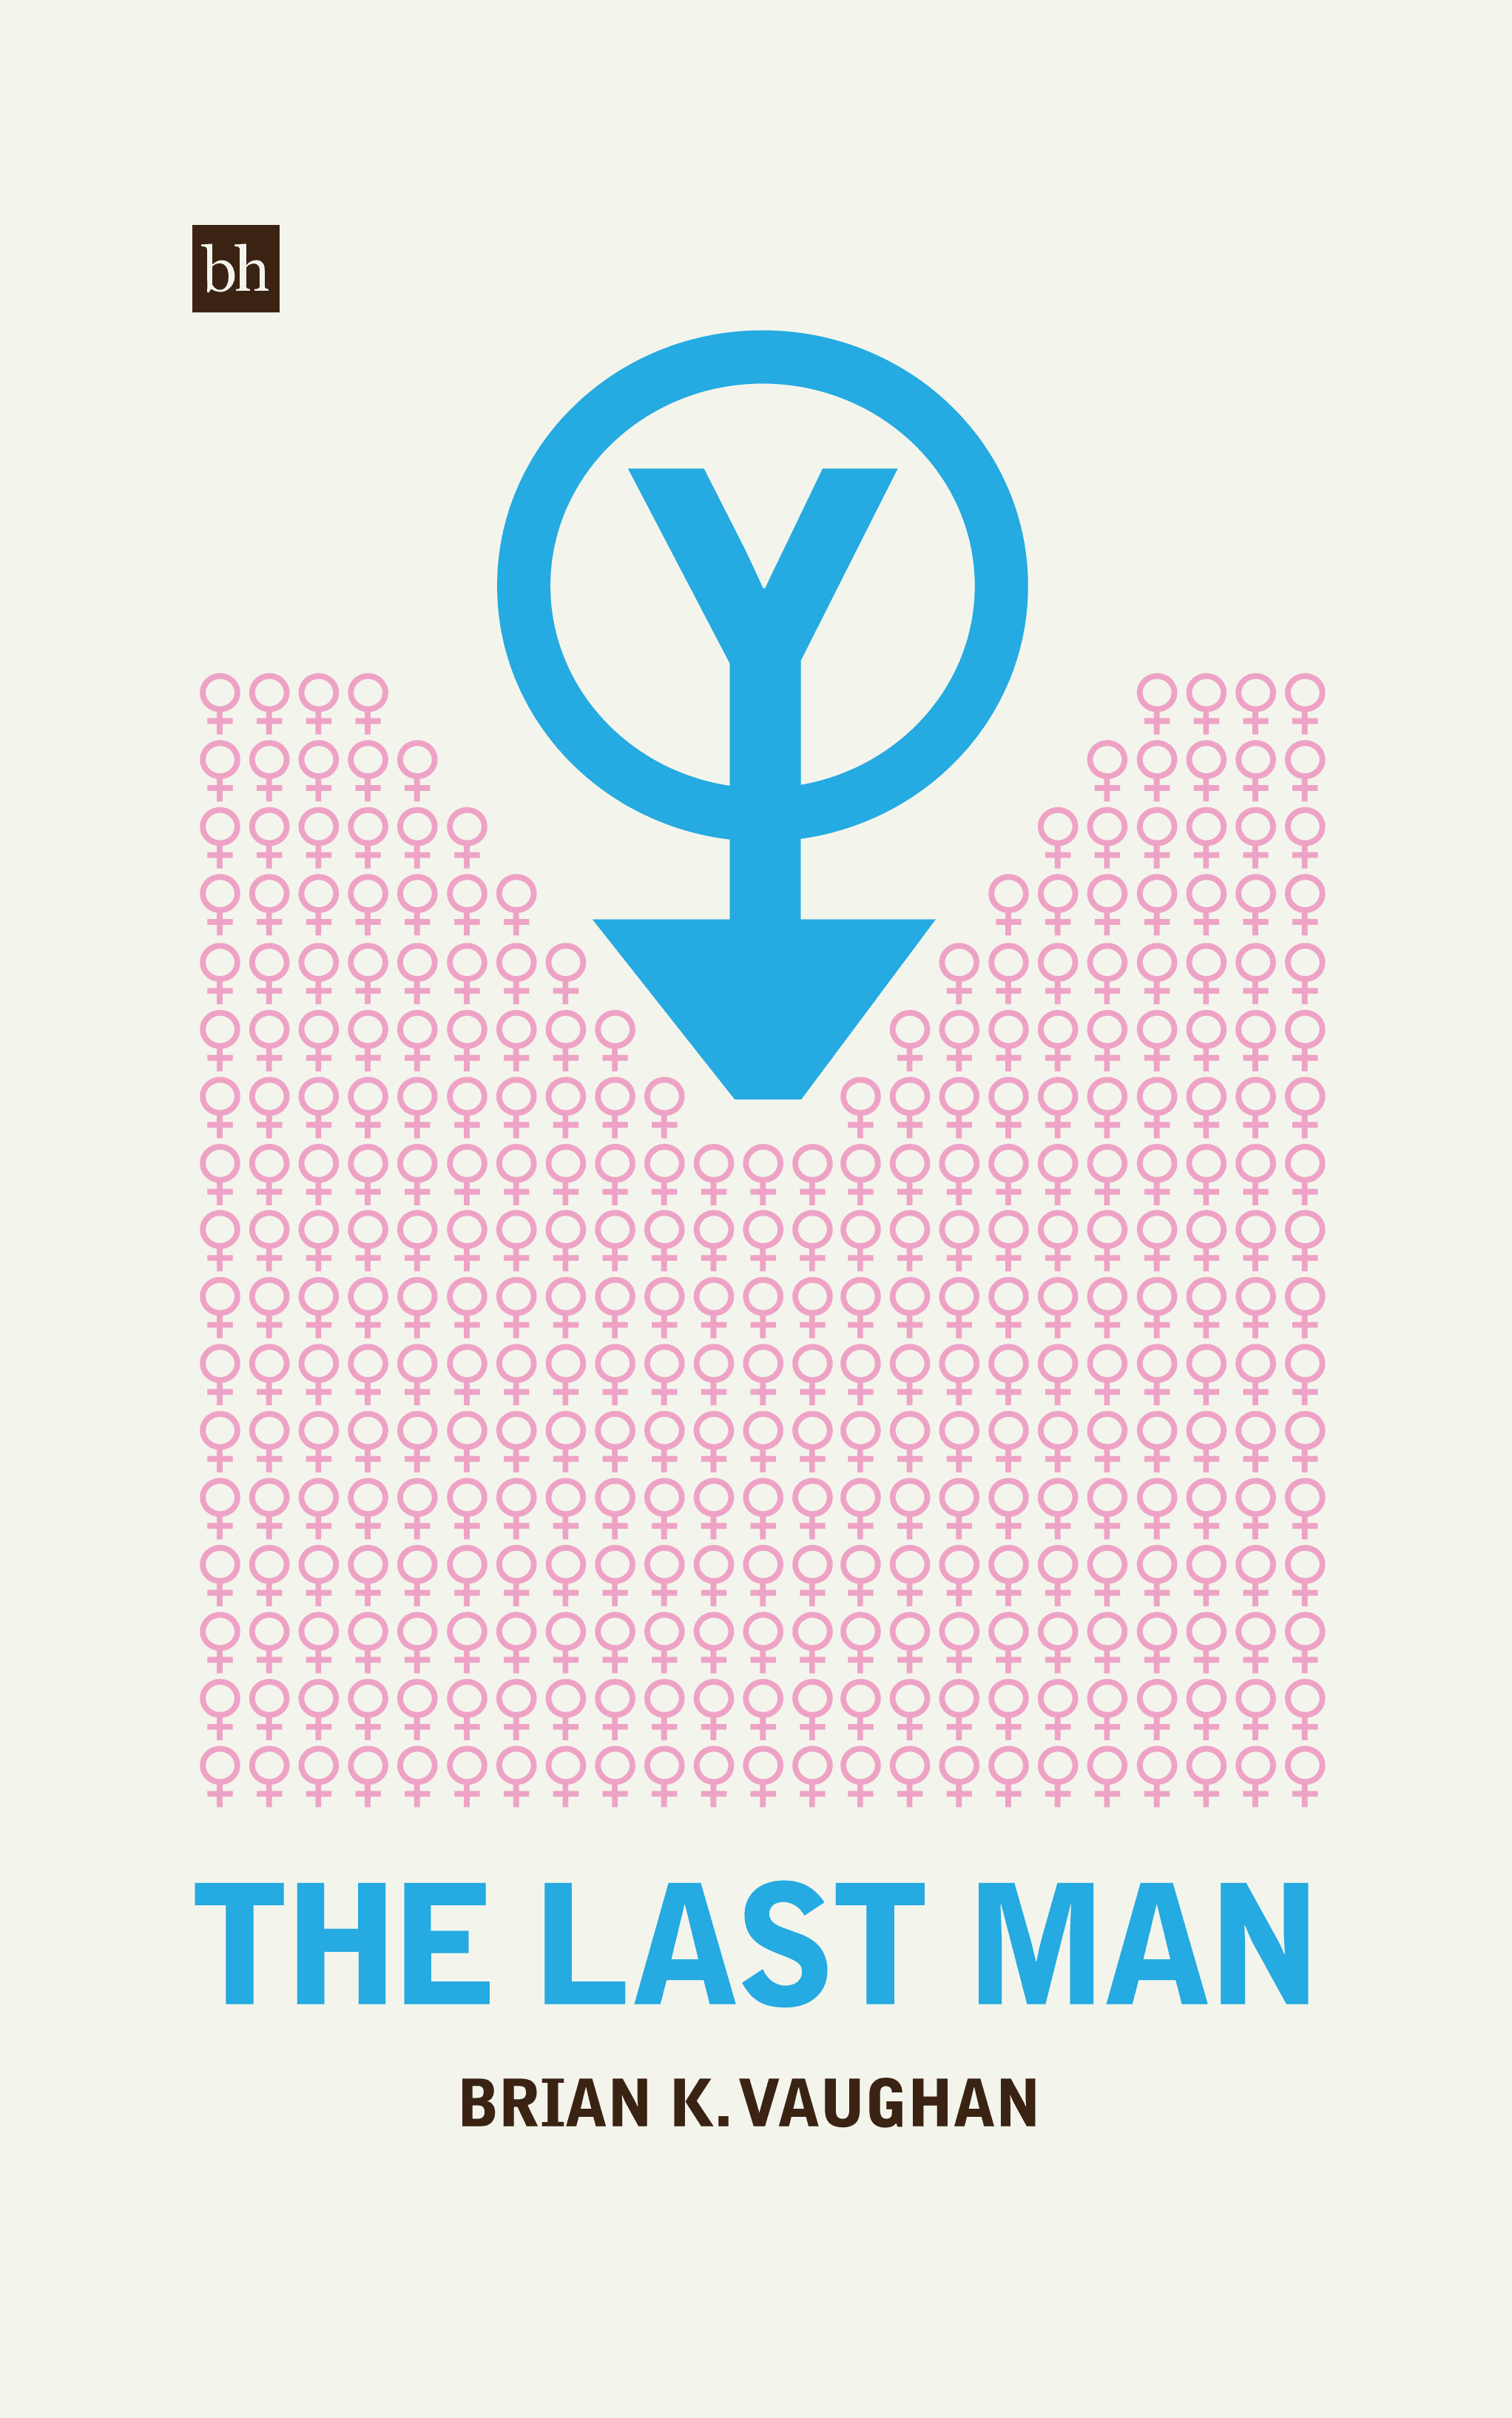 Book cover mock thumbnail for Y: The Last Man